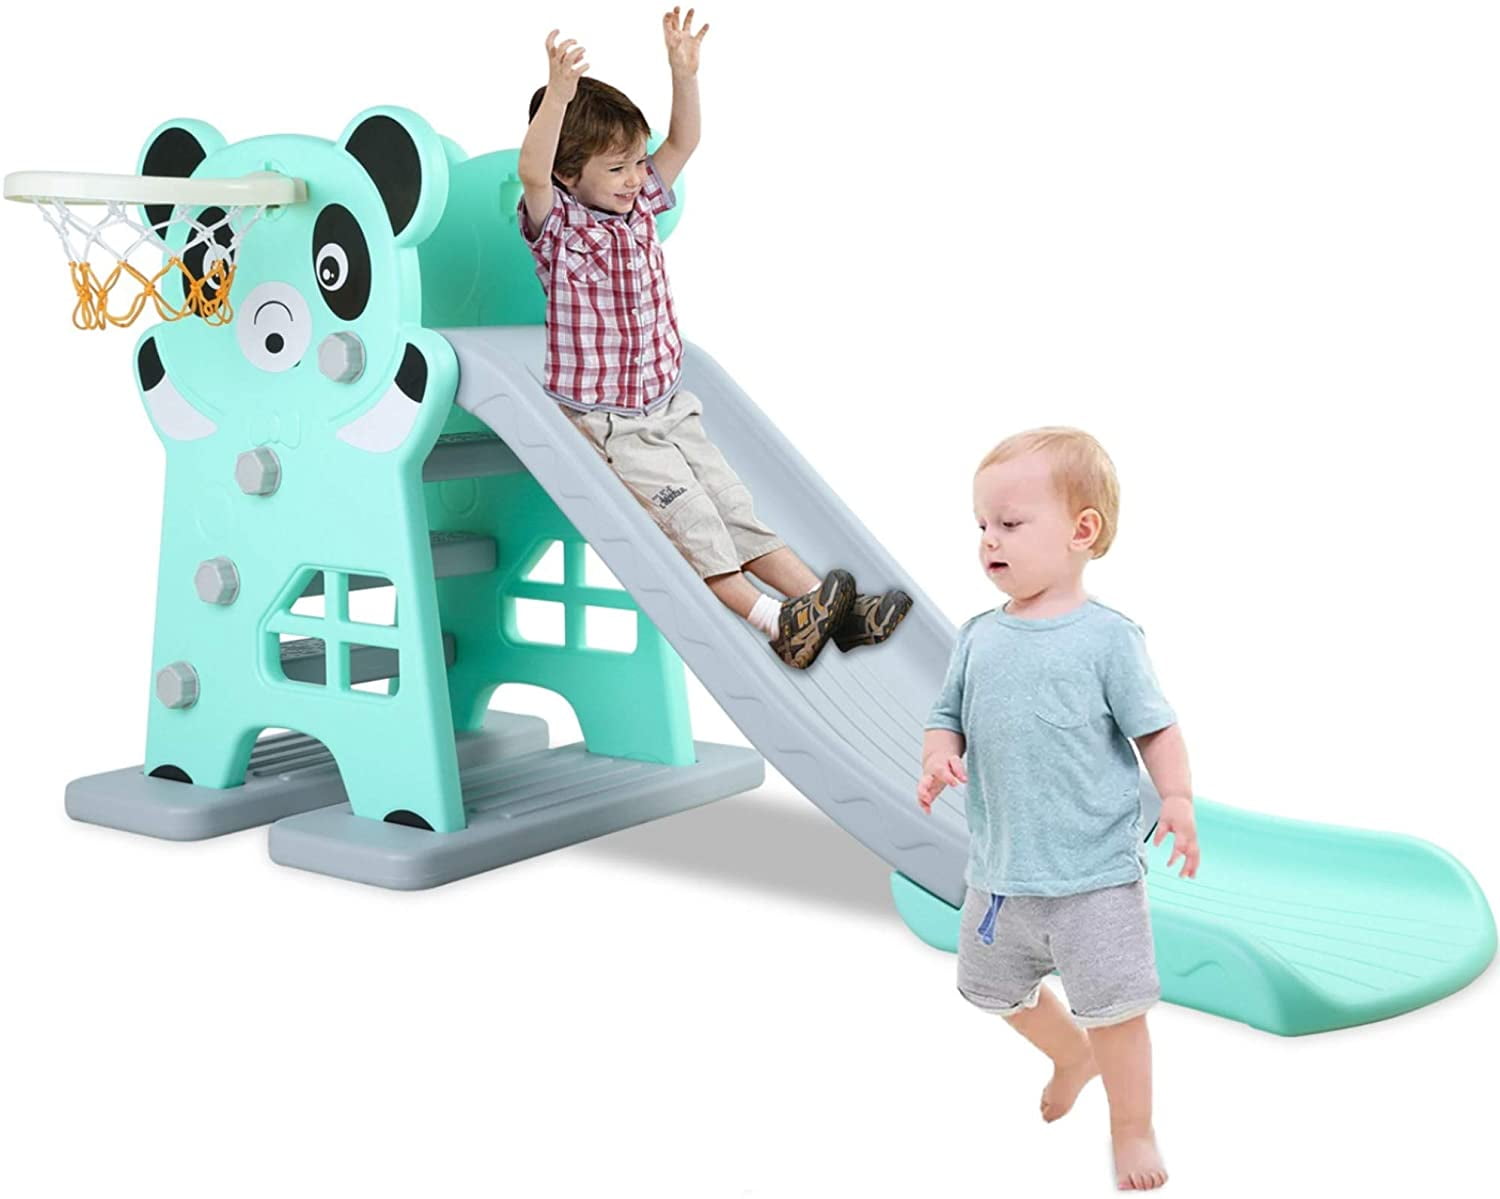 LAZY BUDDY 4 in 1 Kids Slide Swing Set with Ball and Rack Sturdy Baby Slipping Slide Toy for Home and Backyard Use Blue and Red Toddler Climber Playground 